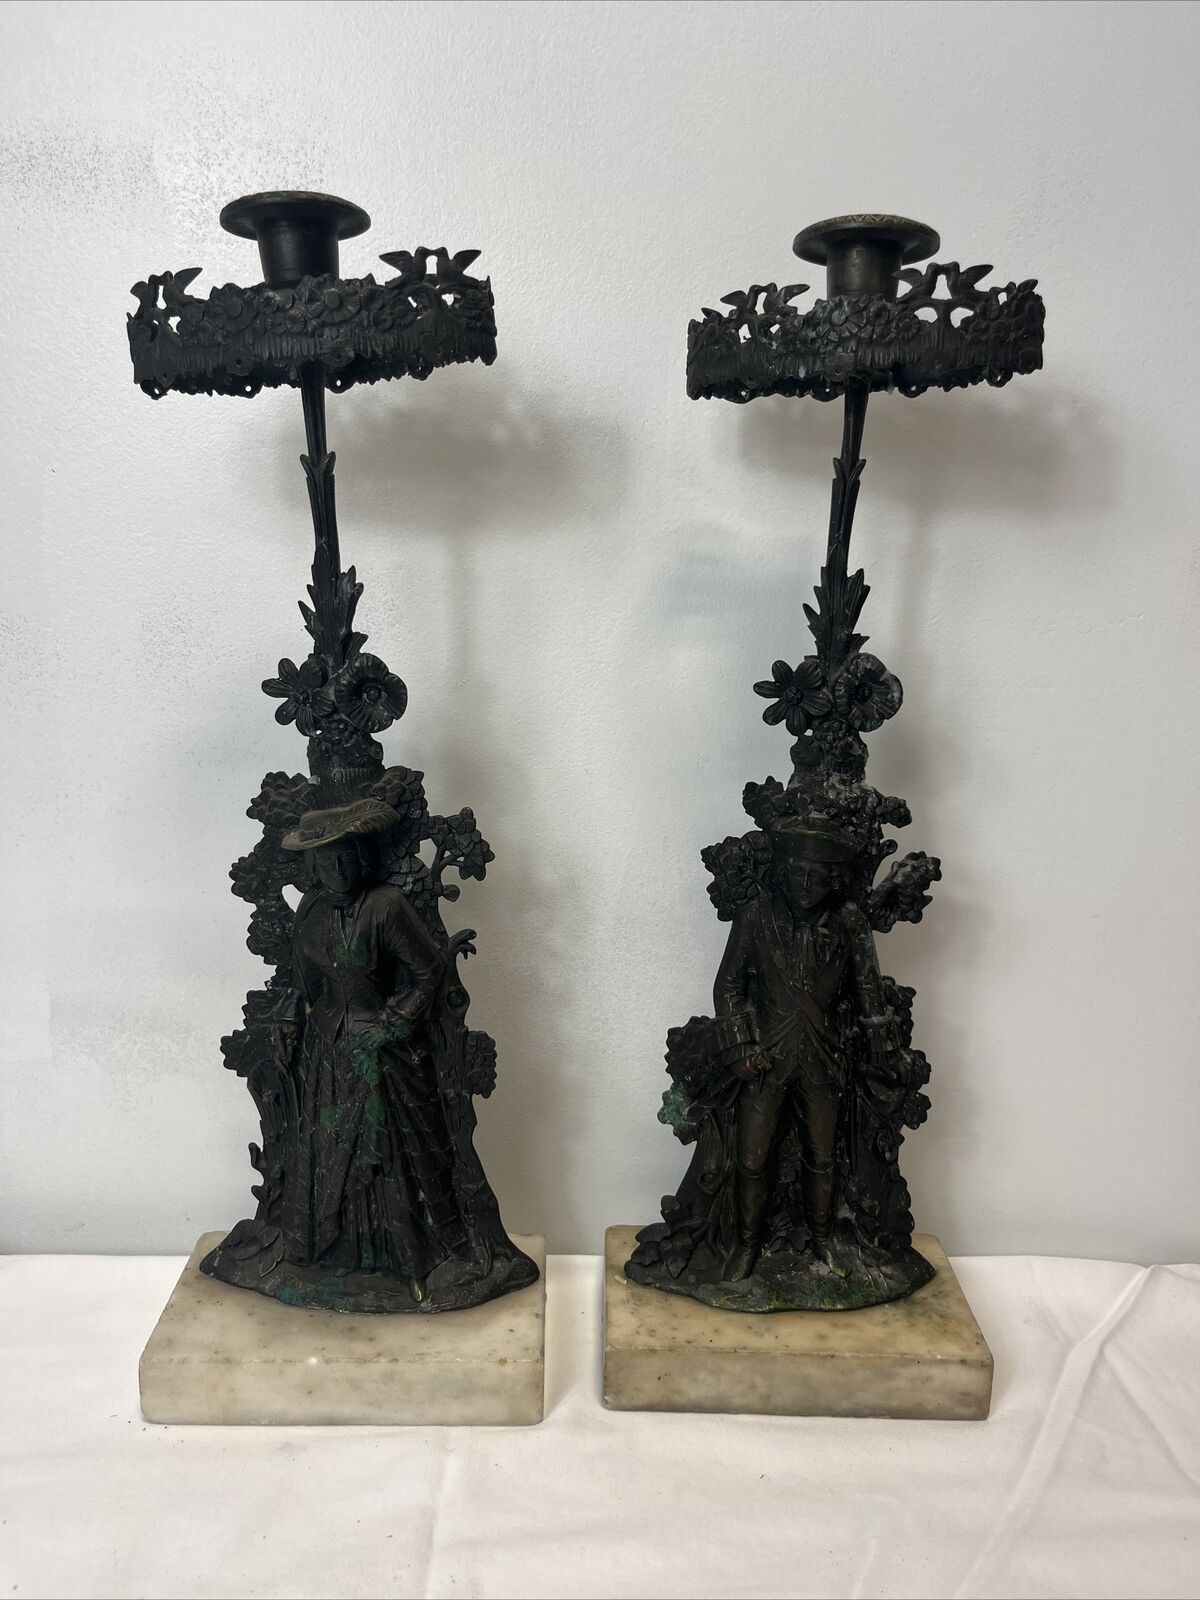 Antique Pair of Victorian Candle Holders Cornelius & Co 1848 Colonial Indian